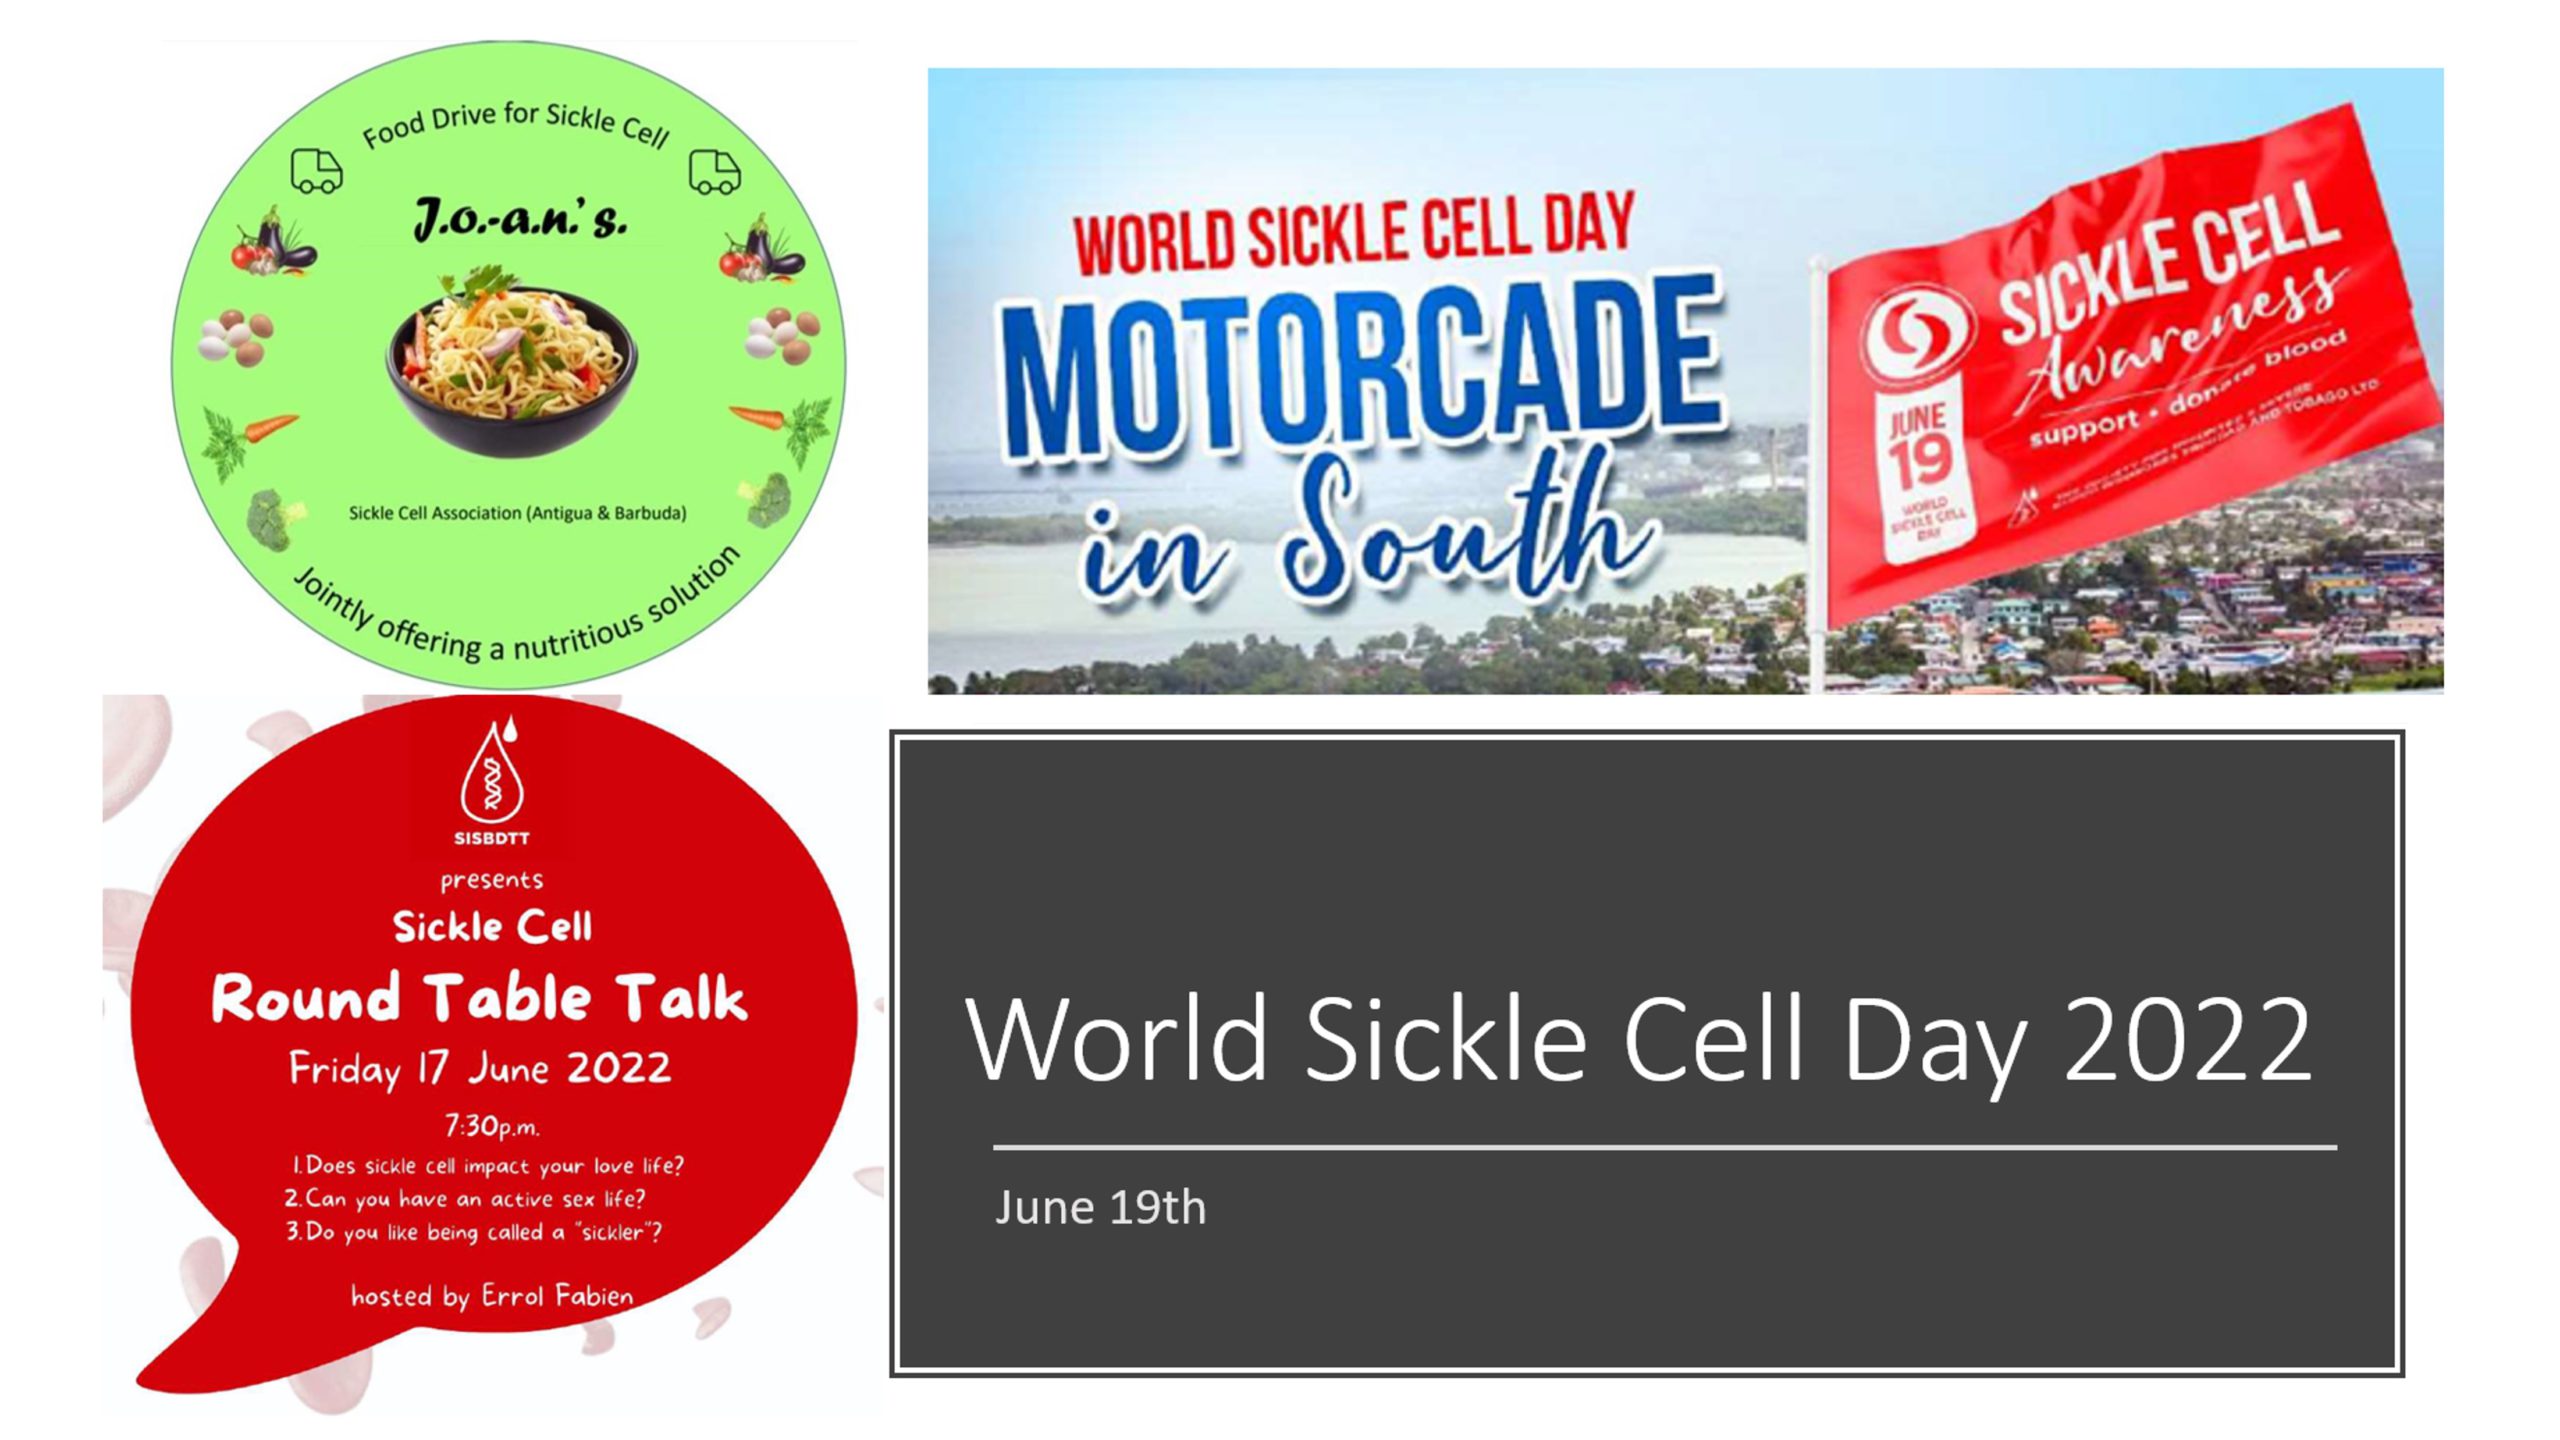 World Sickle Cell Day, 2022